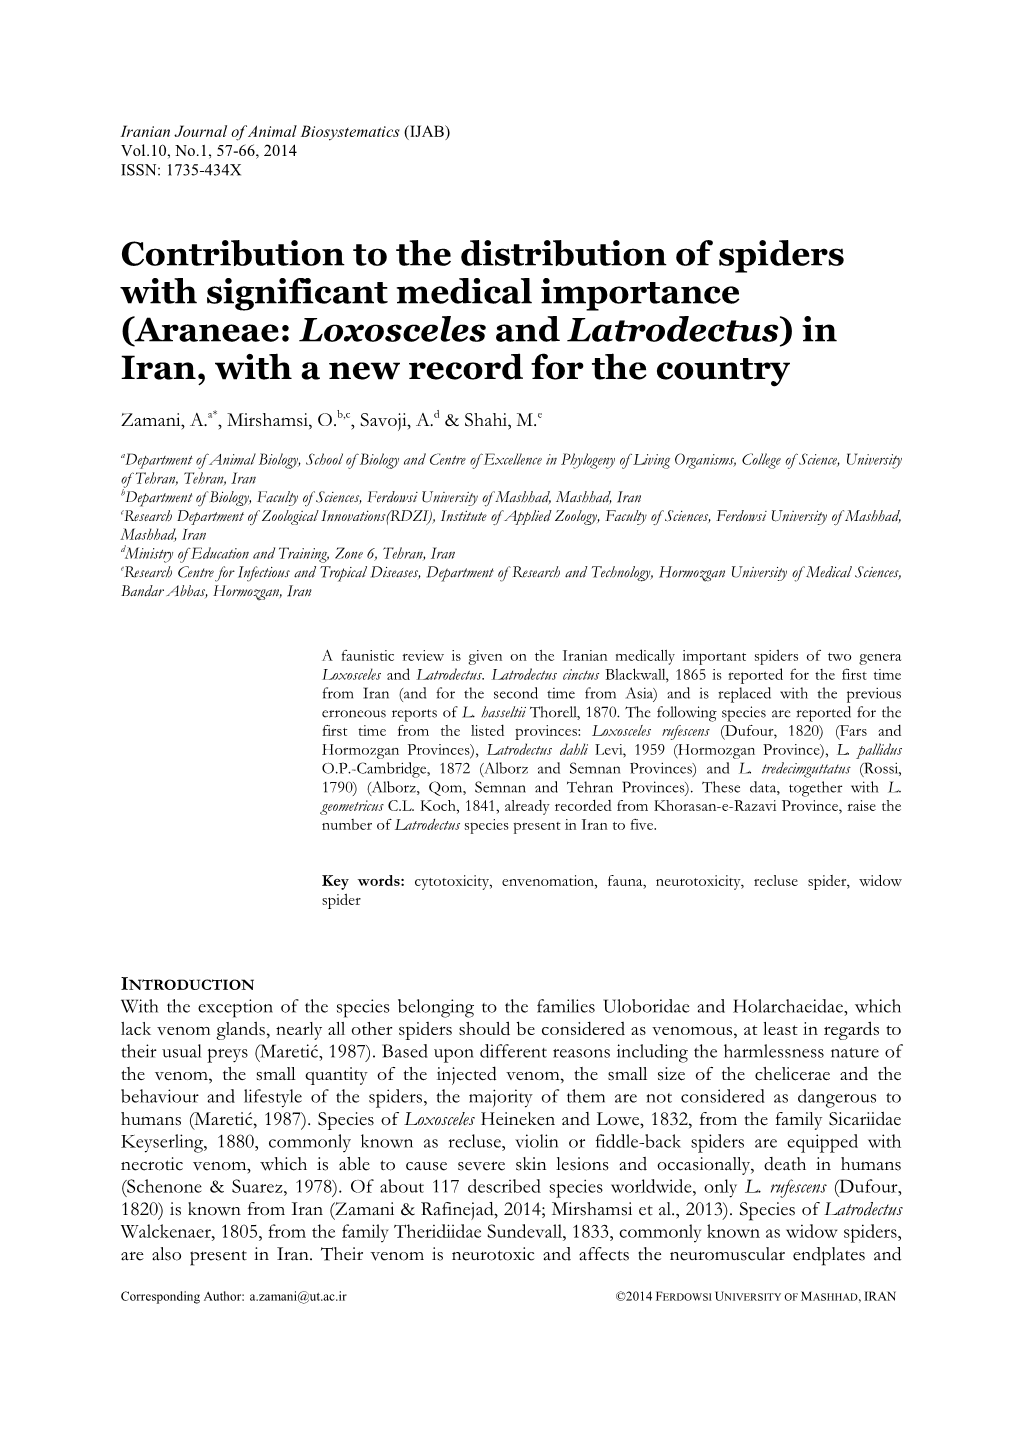 Araneae: Loxosceles and Latrodectus ) in Iran, with a New Record for the Country